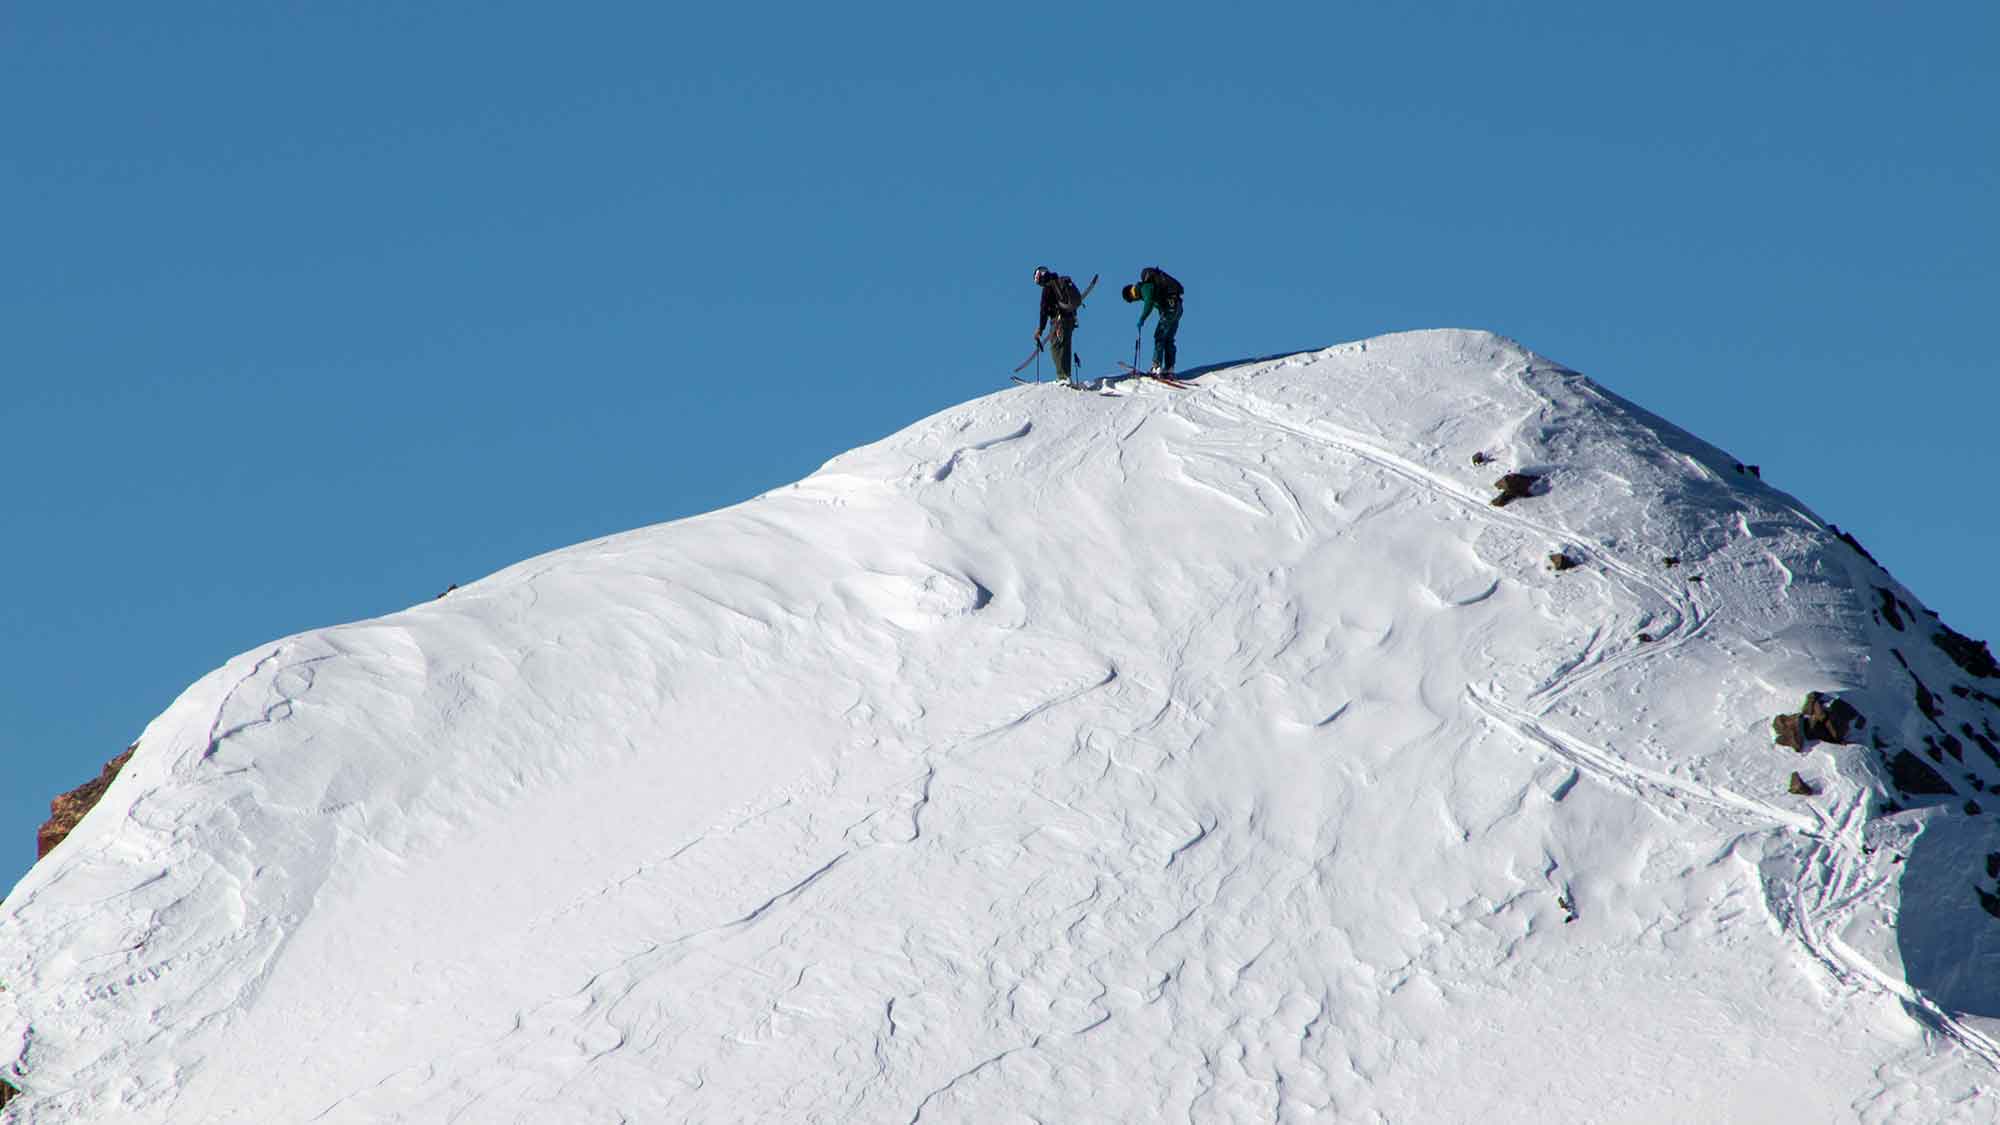 backcountry skiers on Monte Cristo summit